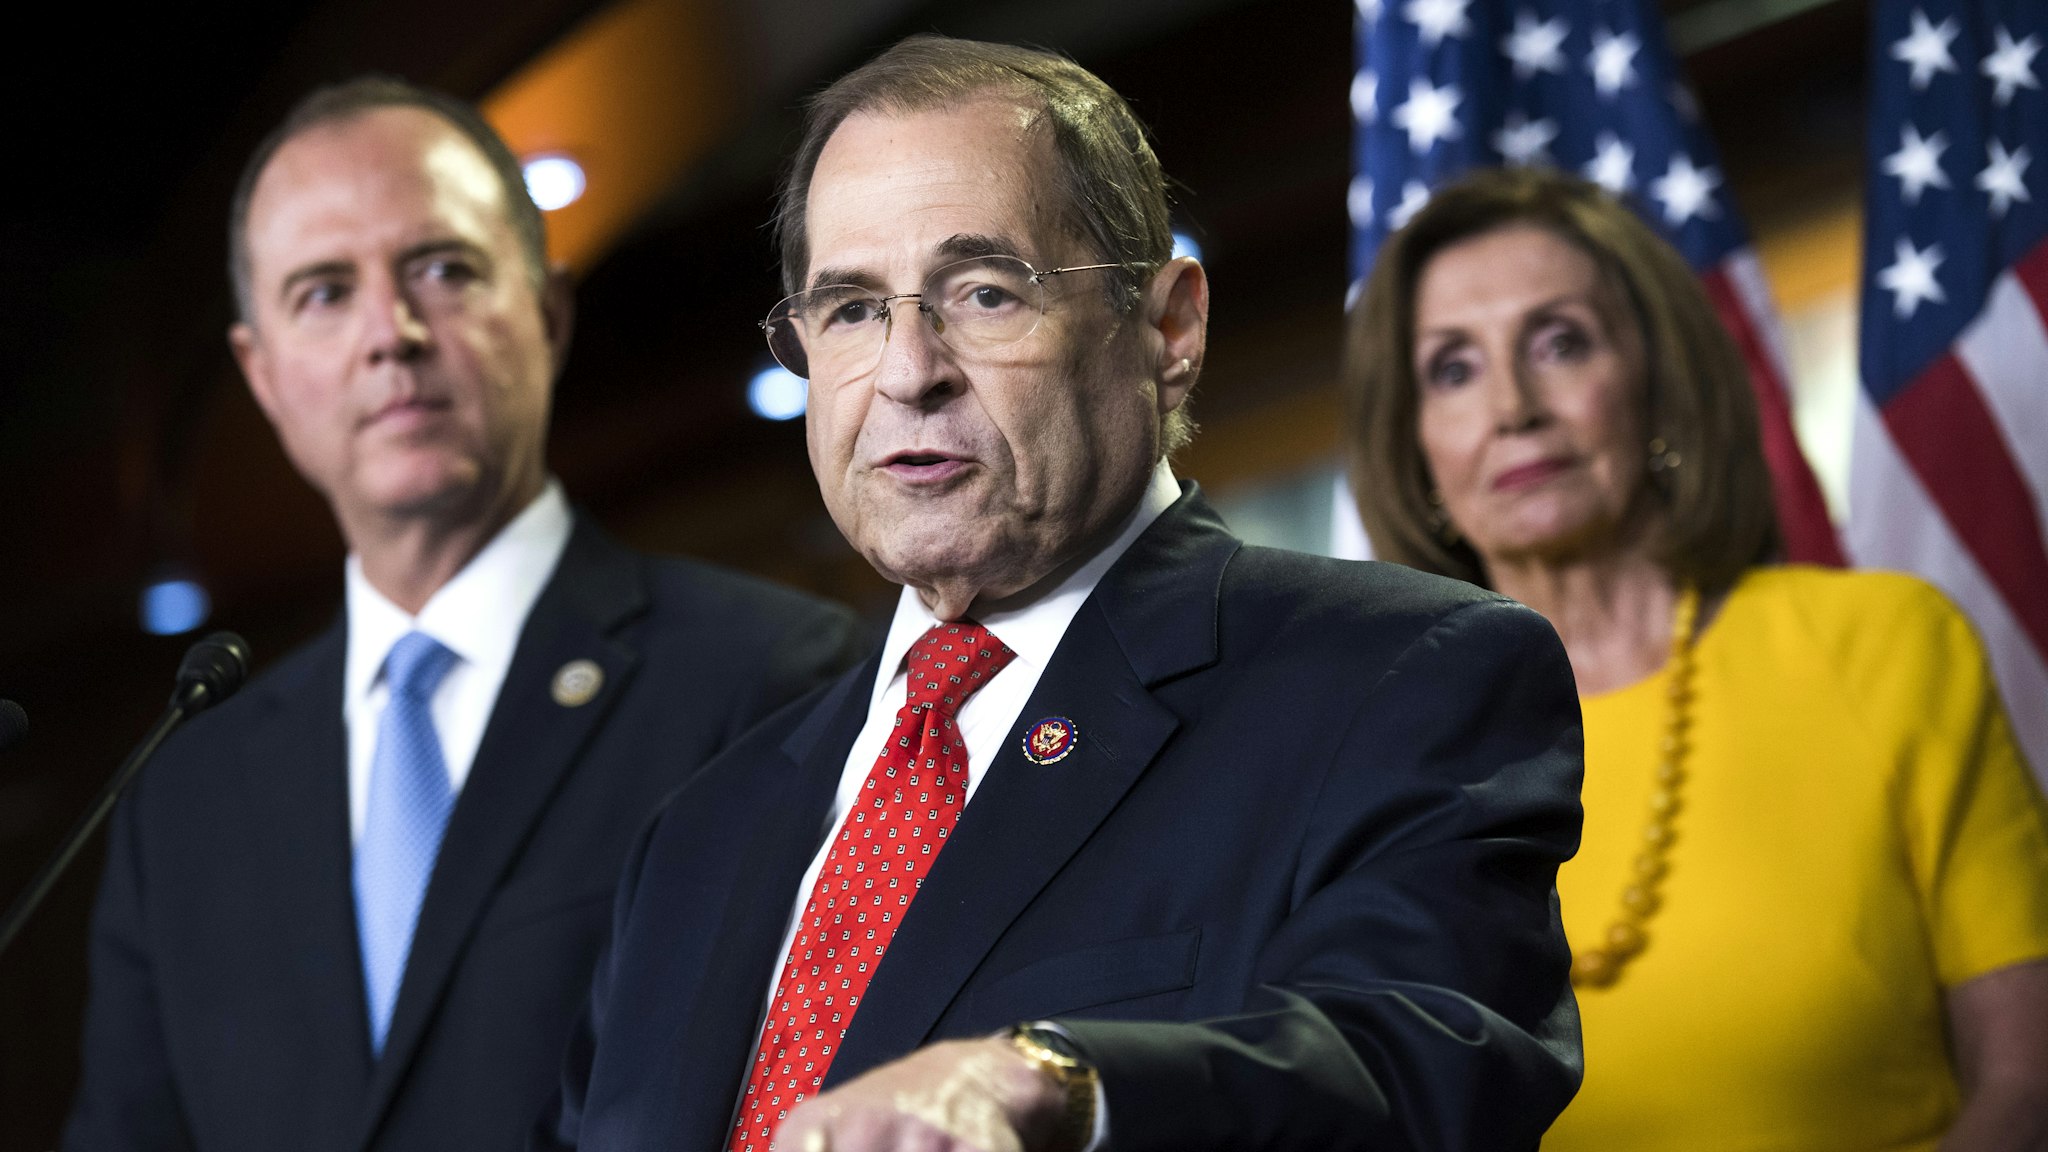 UNITED STATES - JULY 24: From left, House Intelligence Committee Chairman Adam Schiff, D-Calf., Judiciary Chairman Jerrold Nadler, D-N.Y., and Speaker Nancy Pelosi, D-Calif., conduct a news conference on the testimony of former special counsel Robert Mueller on his investigation into Russian interference in the 2016 election on Wednesday, July 24, 2019.